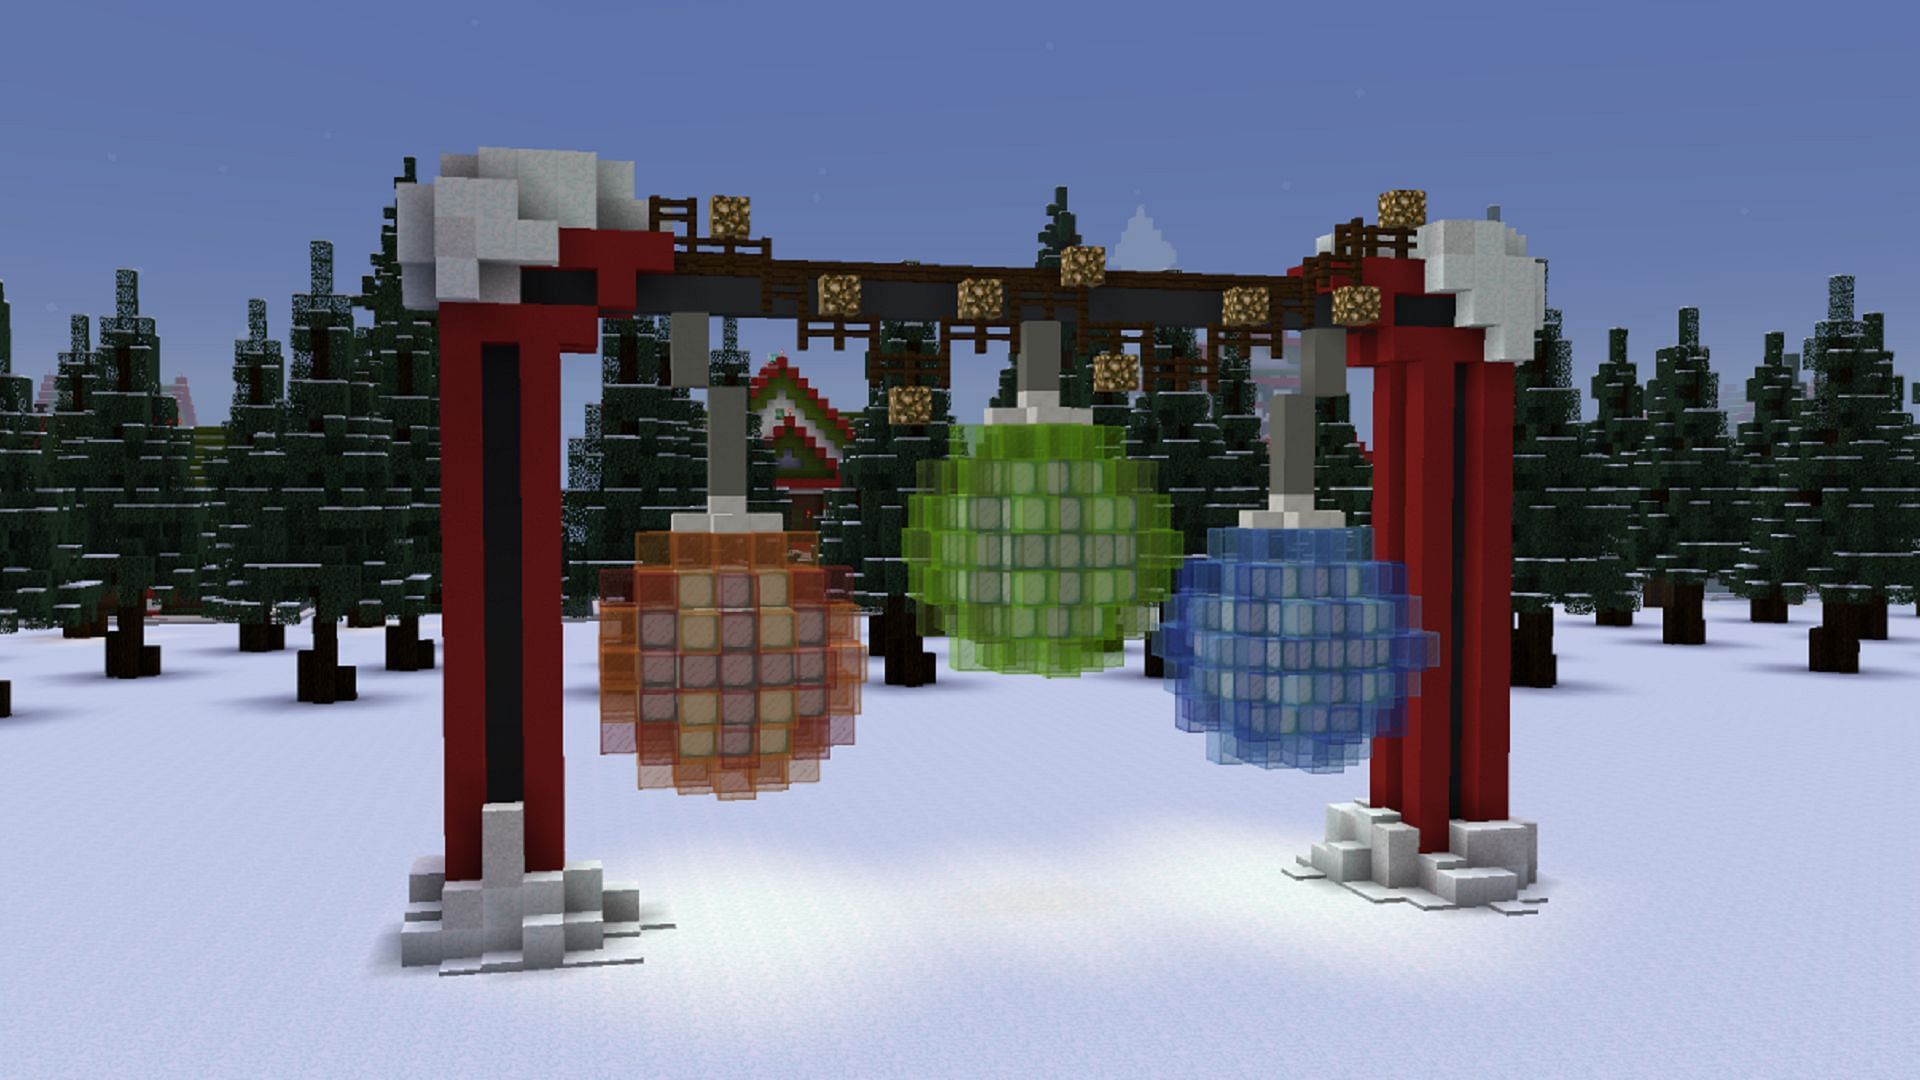 Light the way through your Minecraft world with some well-lit seasonal ornaments (Image via Bobicraft/Planet Minecraft)